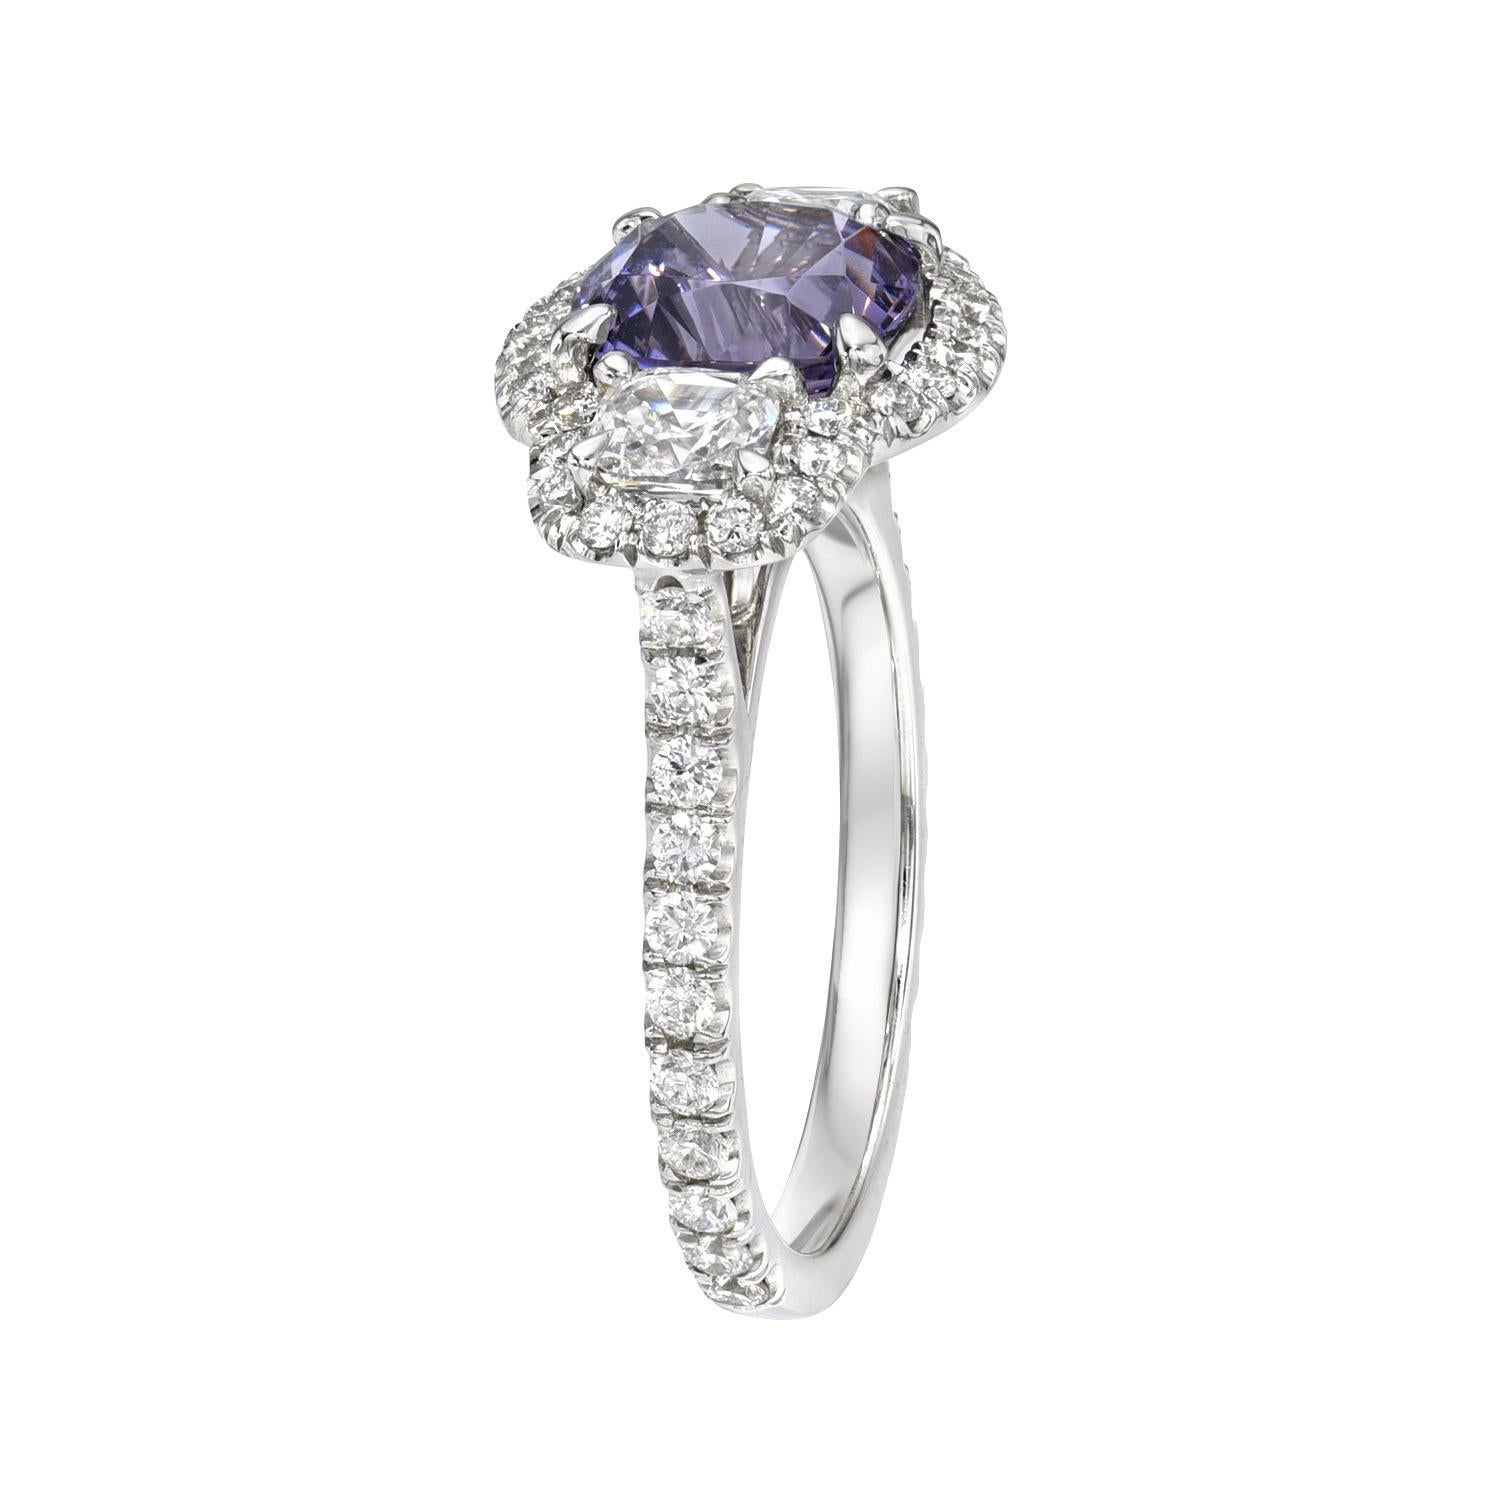 Vivid 2.30 carat natural Lavender Spinel cushion, three stone platinum ring, flanked by a pair of 0.68 carat, F/VS cushion diamonds and a total of 0.58 carats of round brilliant diamonds.
Ring size 6. Resizing is complementary upon request.
Returns